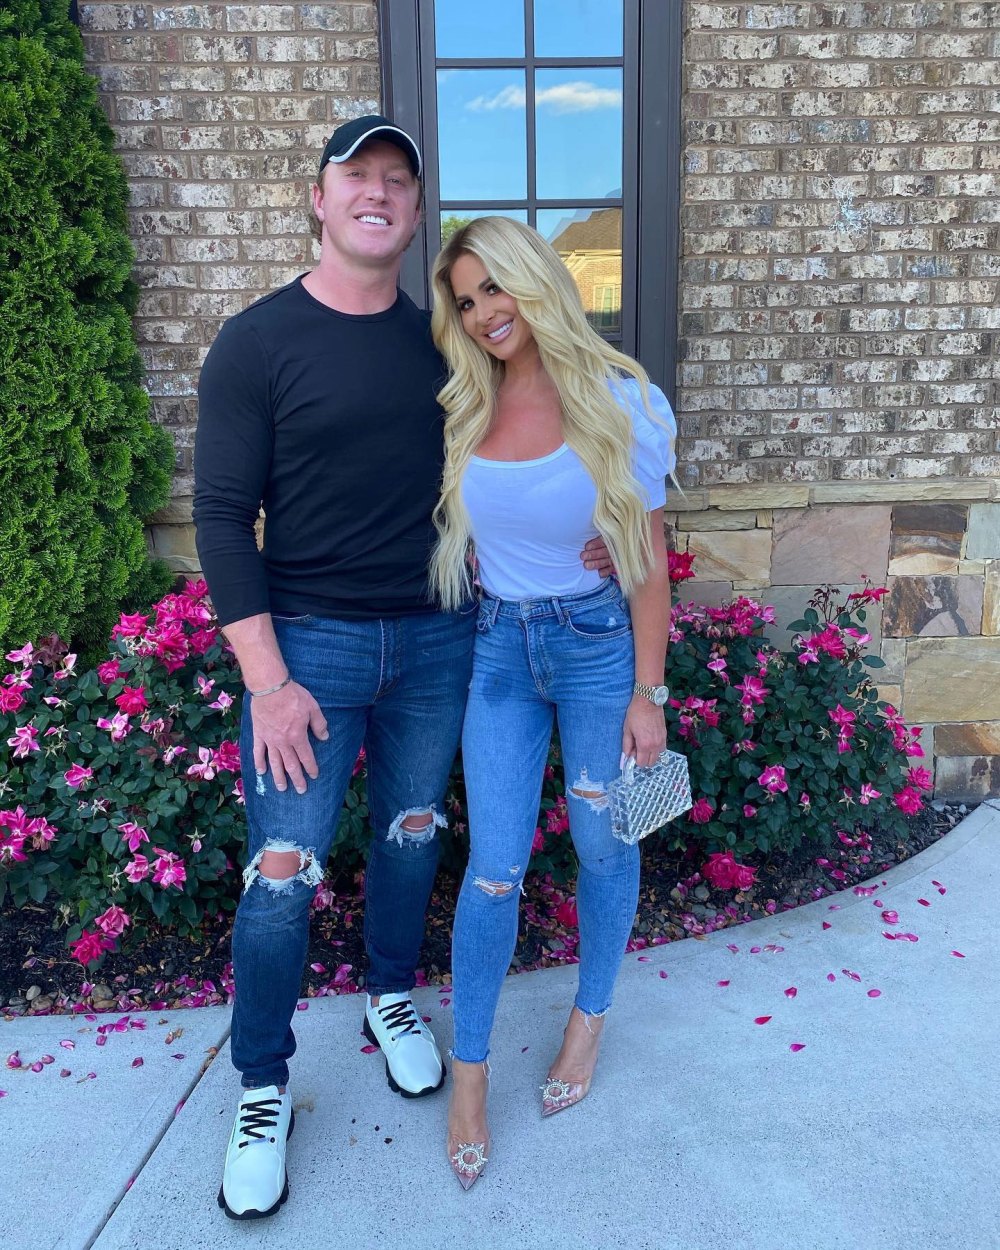 Kim Zolciak-Biermann Appears Unbothered and Ditches Wedding Ring in 1st Post After Kroy Biermann Divorce News